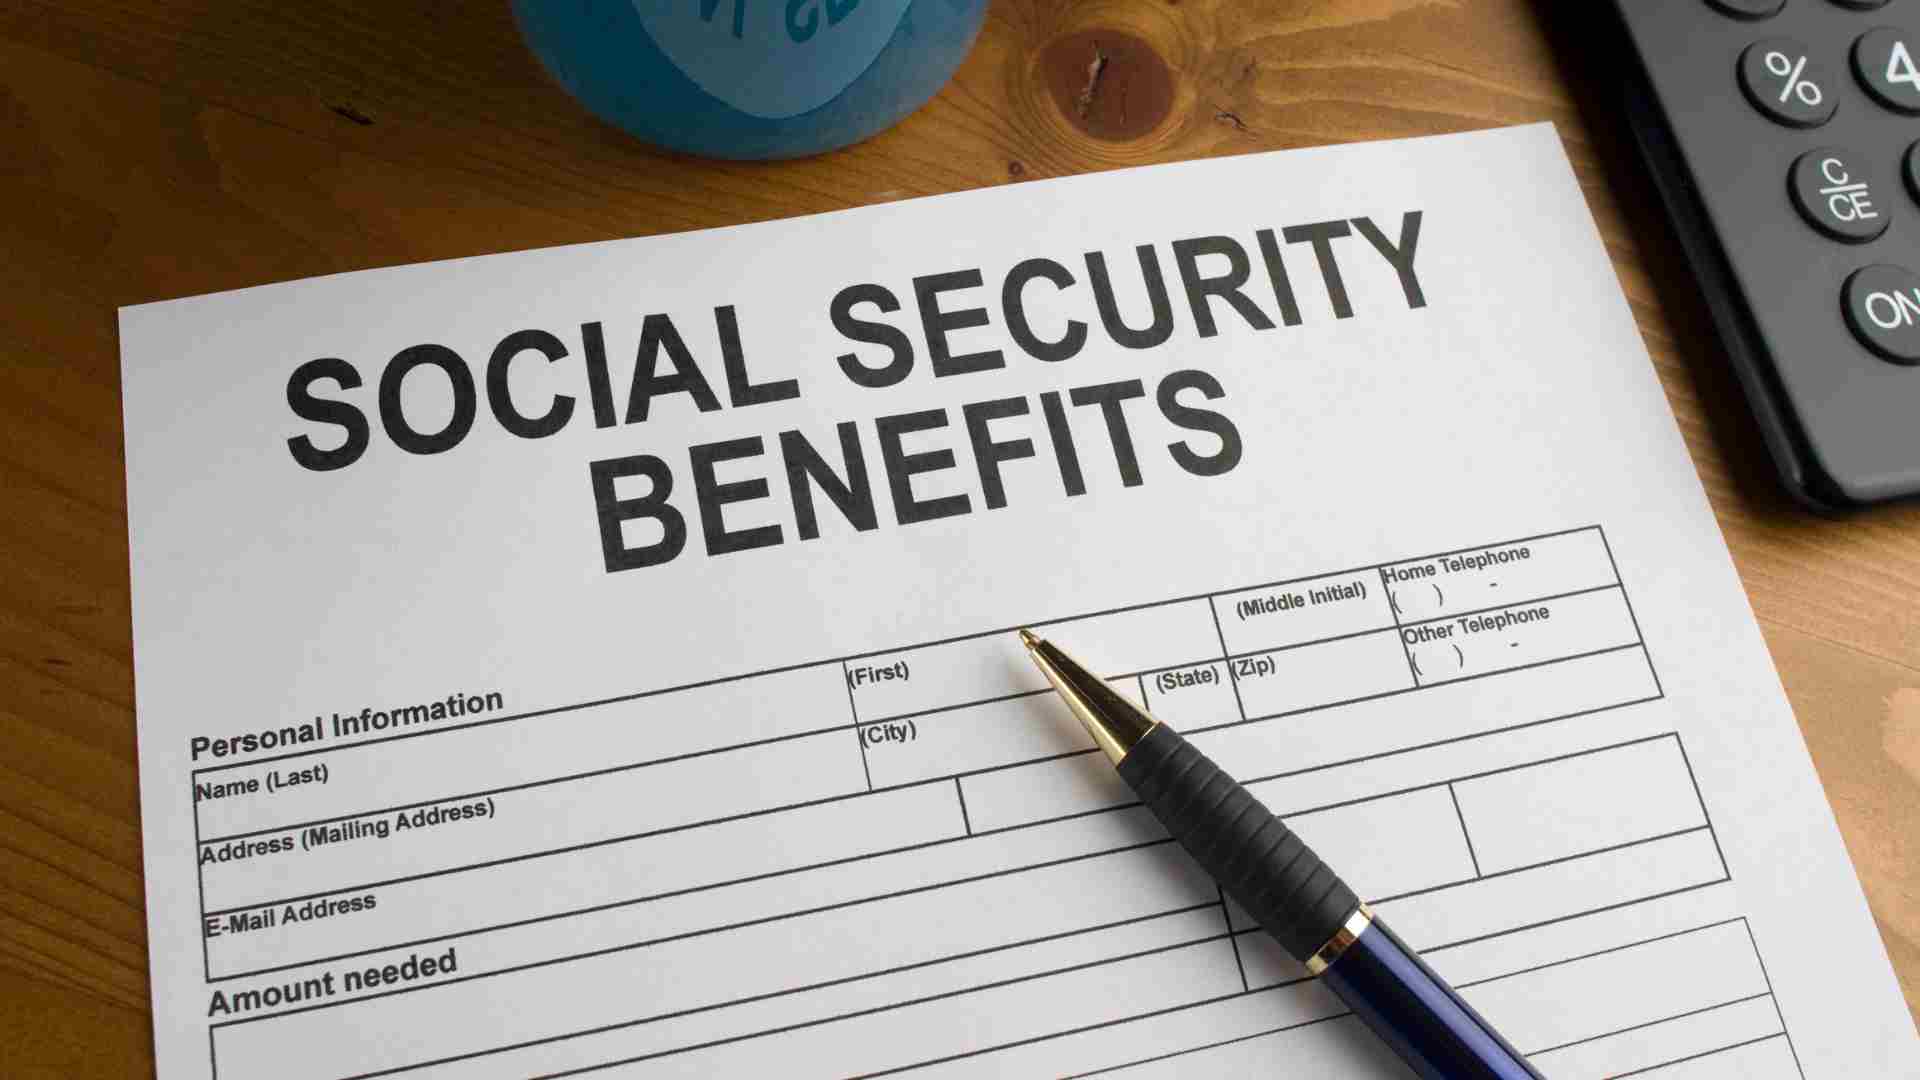 The Social Security Administration recommends applying for retirement benefits a few months before the date you want to get monthly payments